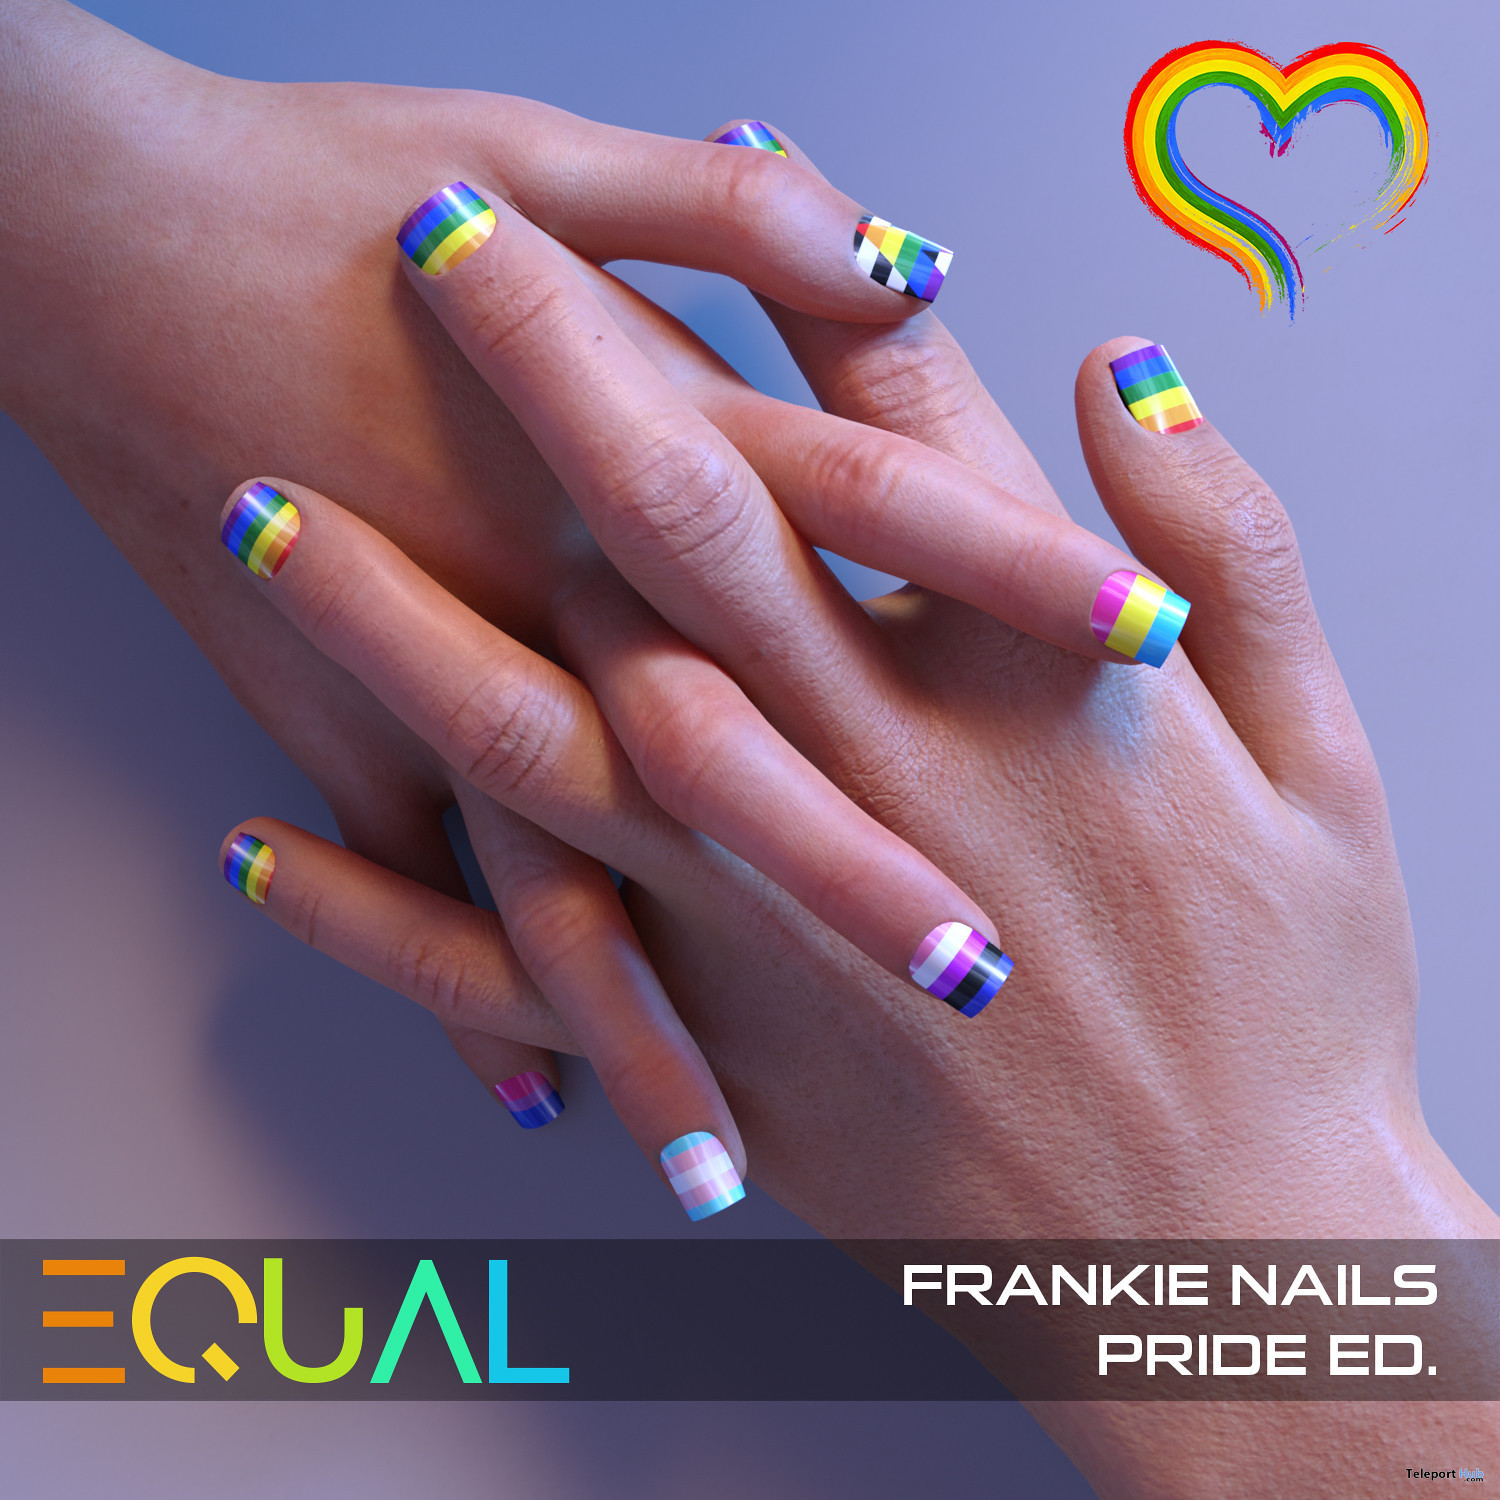 Frankie Nails Pride Edition June 2021 Group Gift by EQUAL - Teleport Hub - teleporthub.com